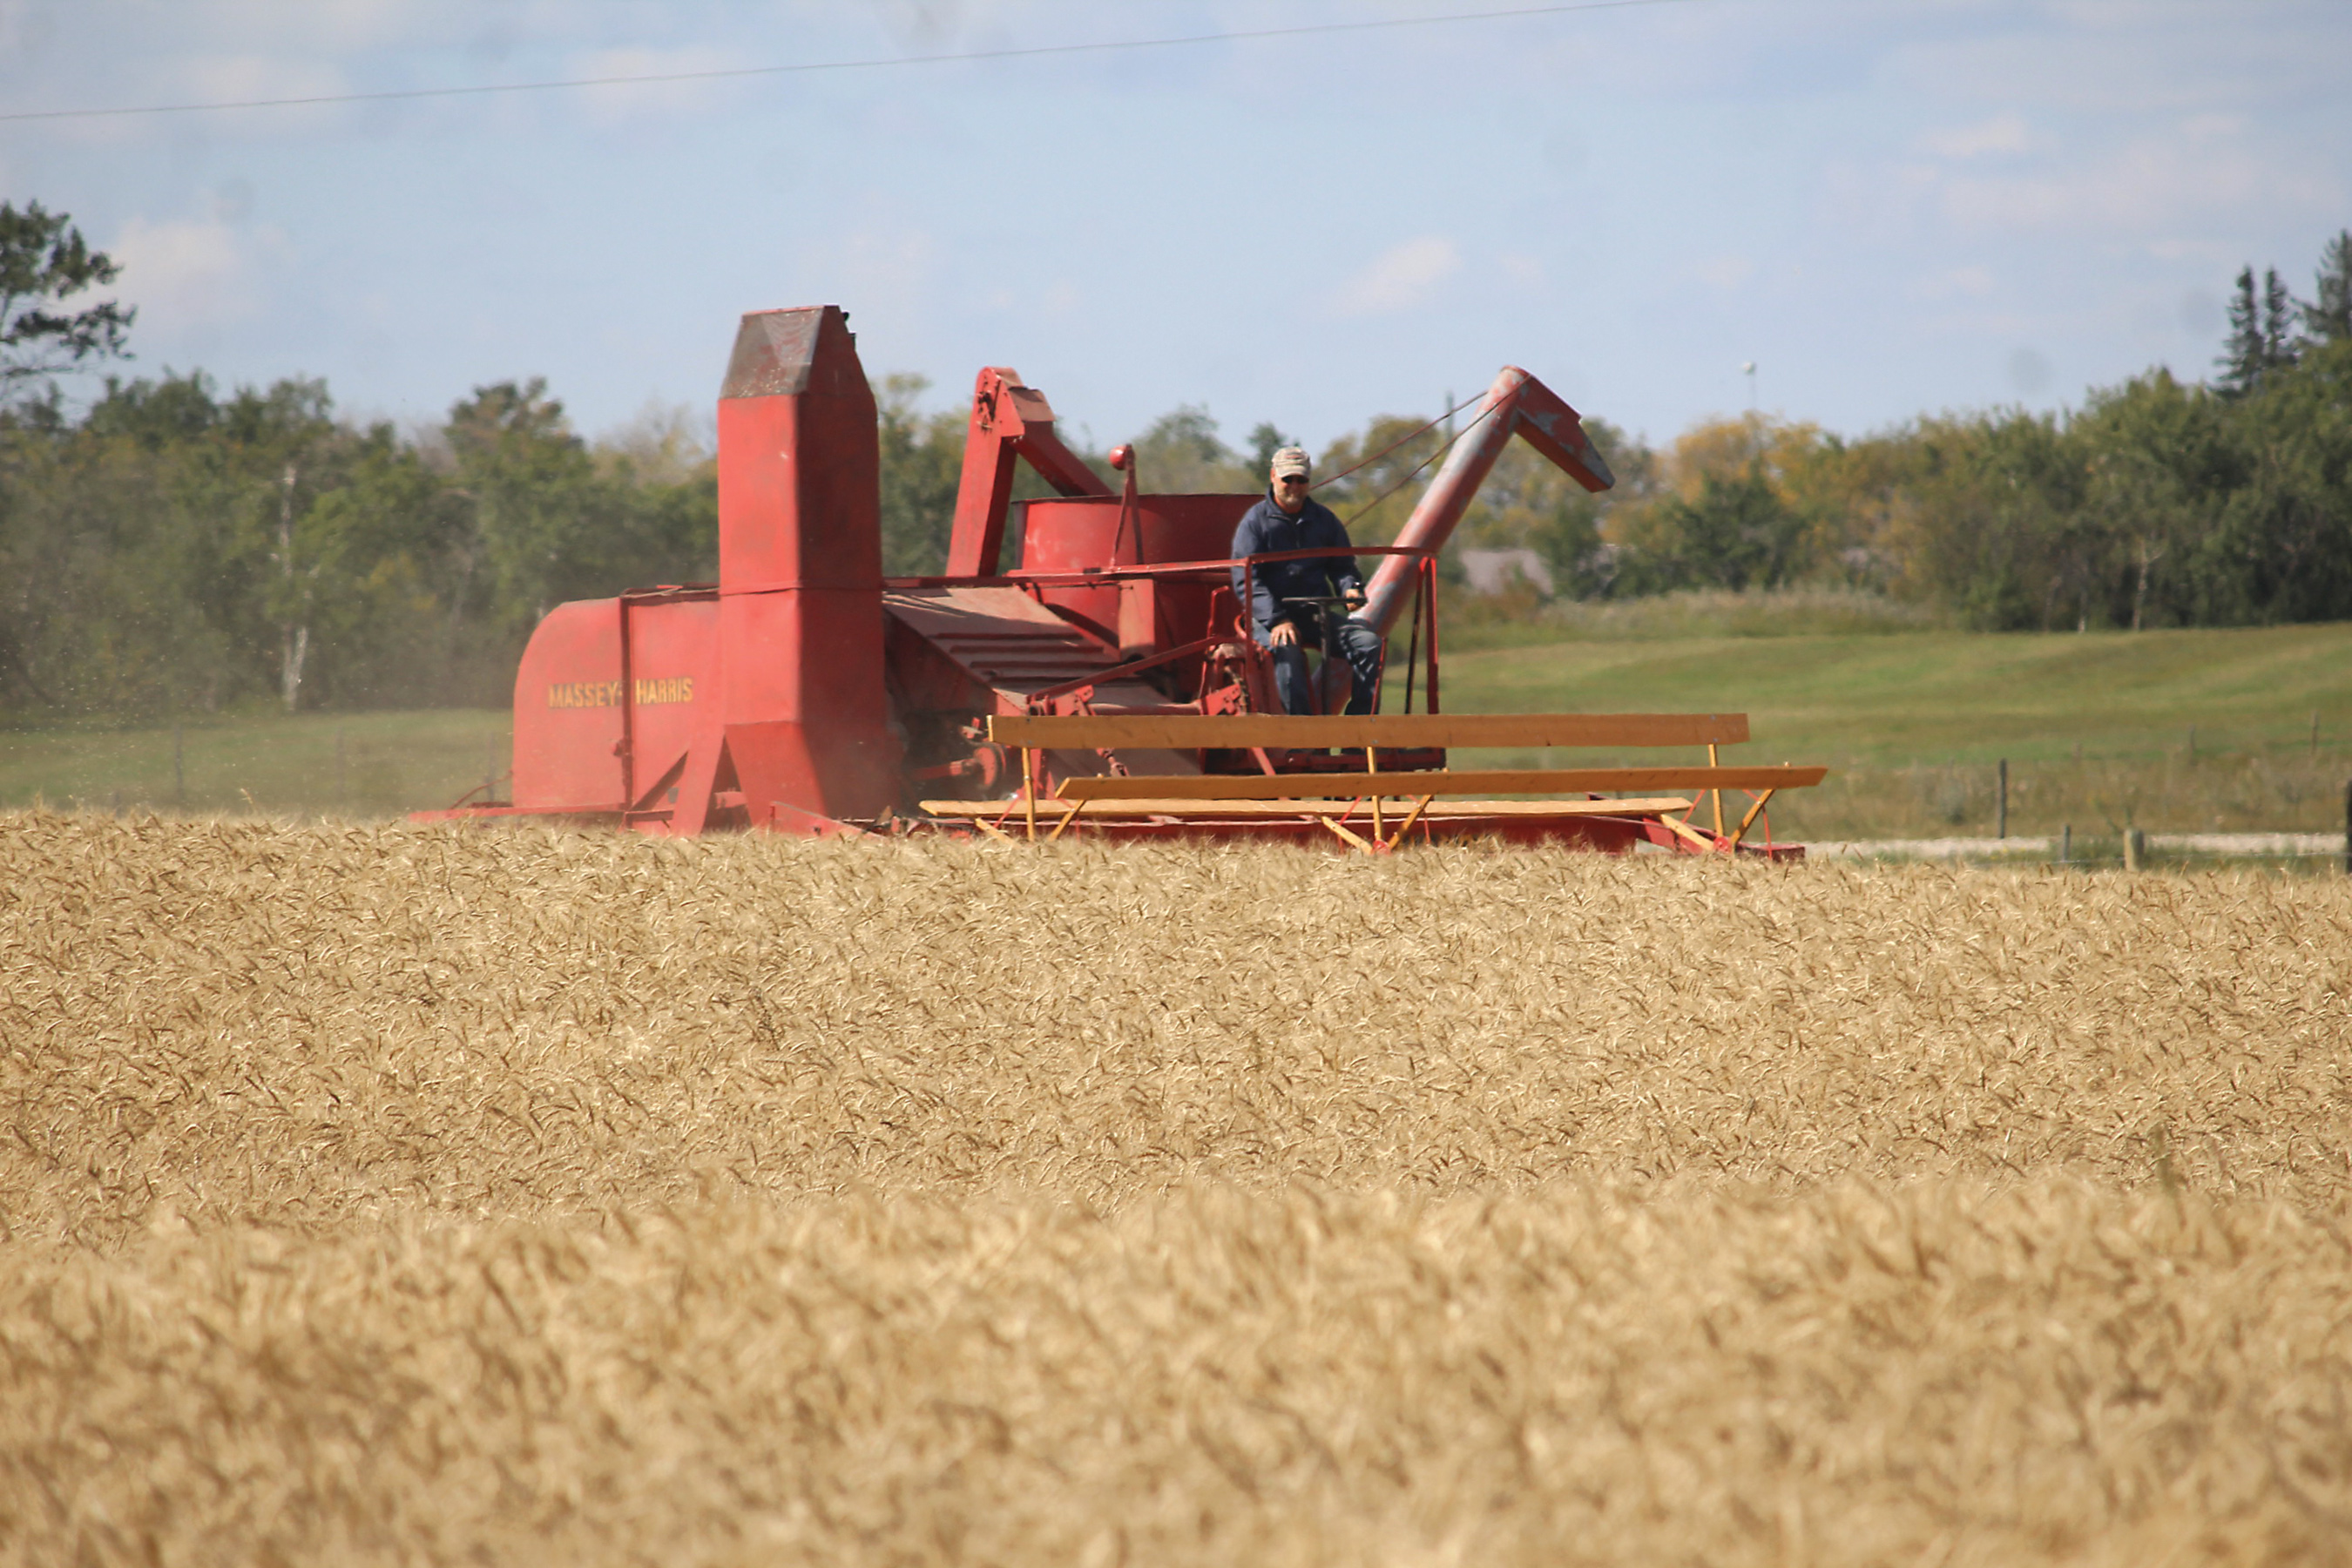 Wheat being combined with a historic Massey Harris combine during the Wilson old-time harvest south of Wawota.